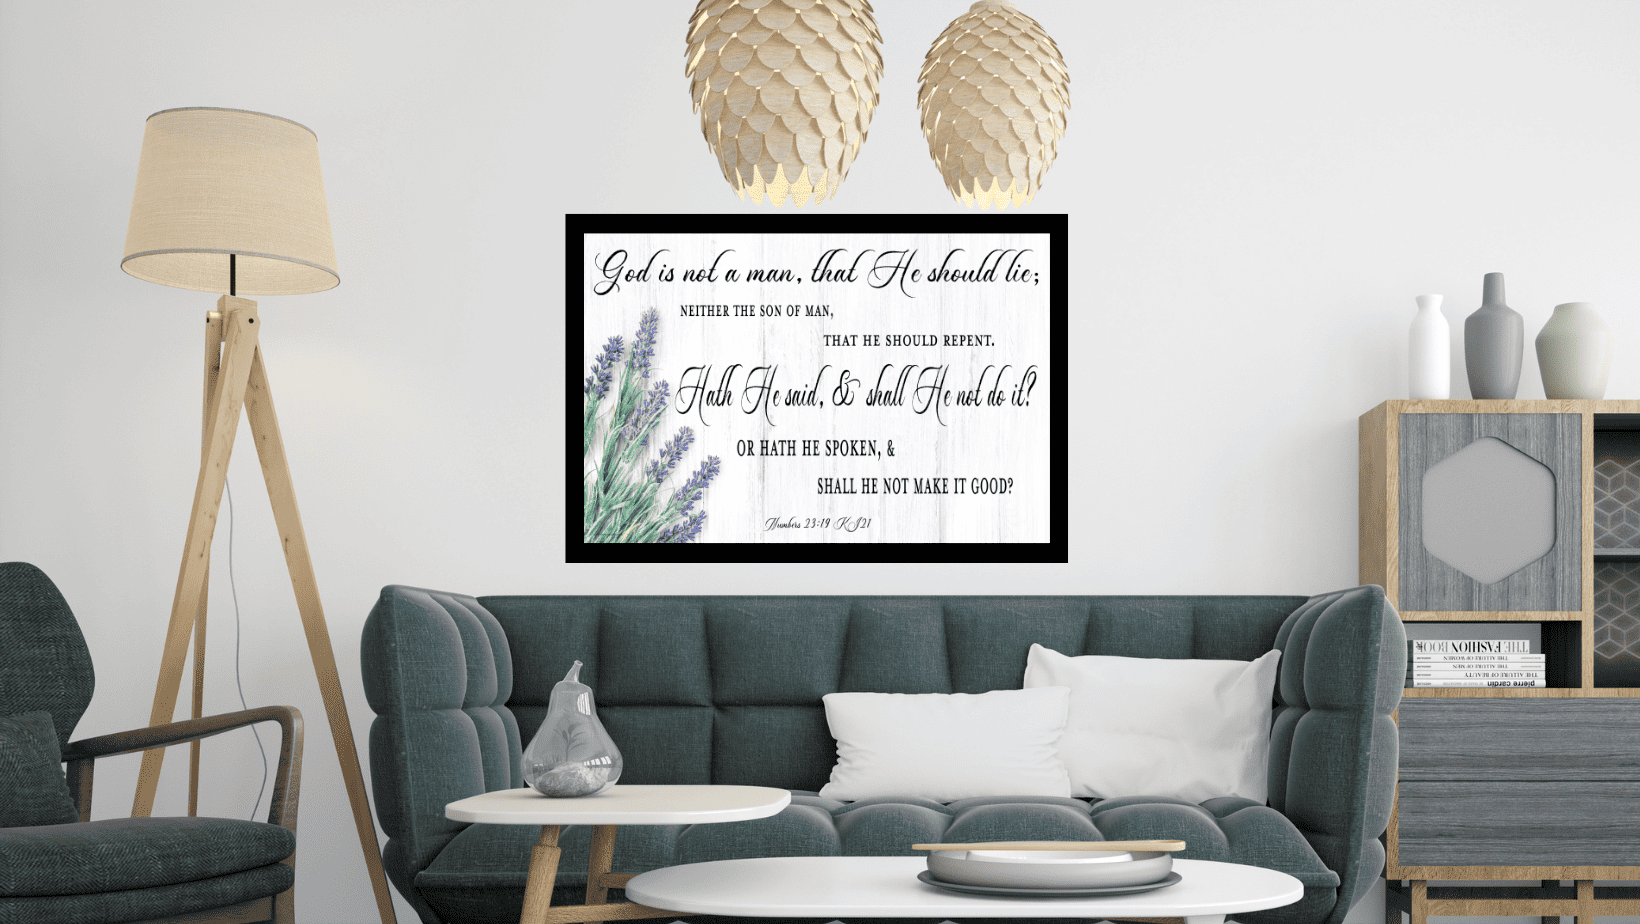 Numbers 23:19 Art Print in living room above couch